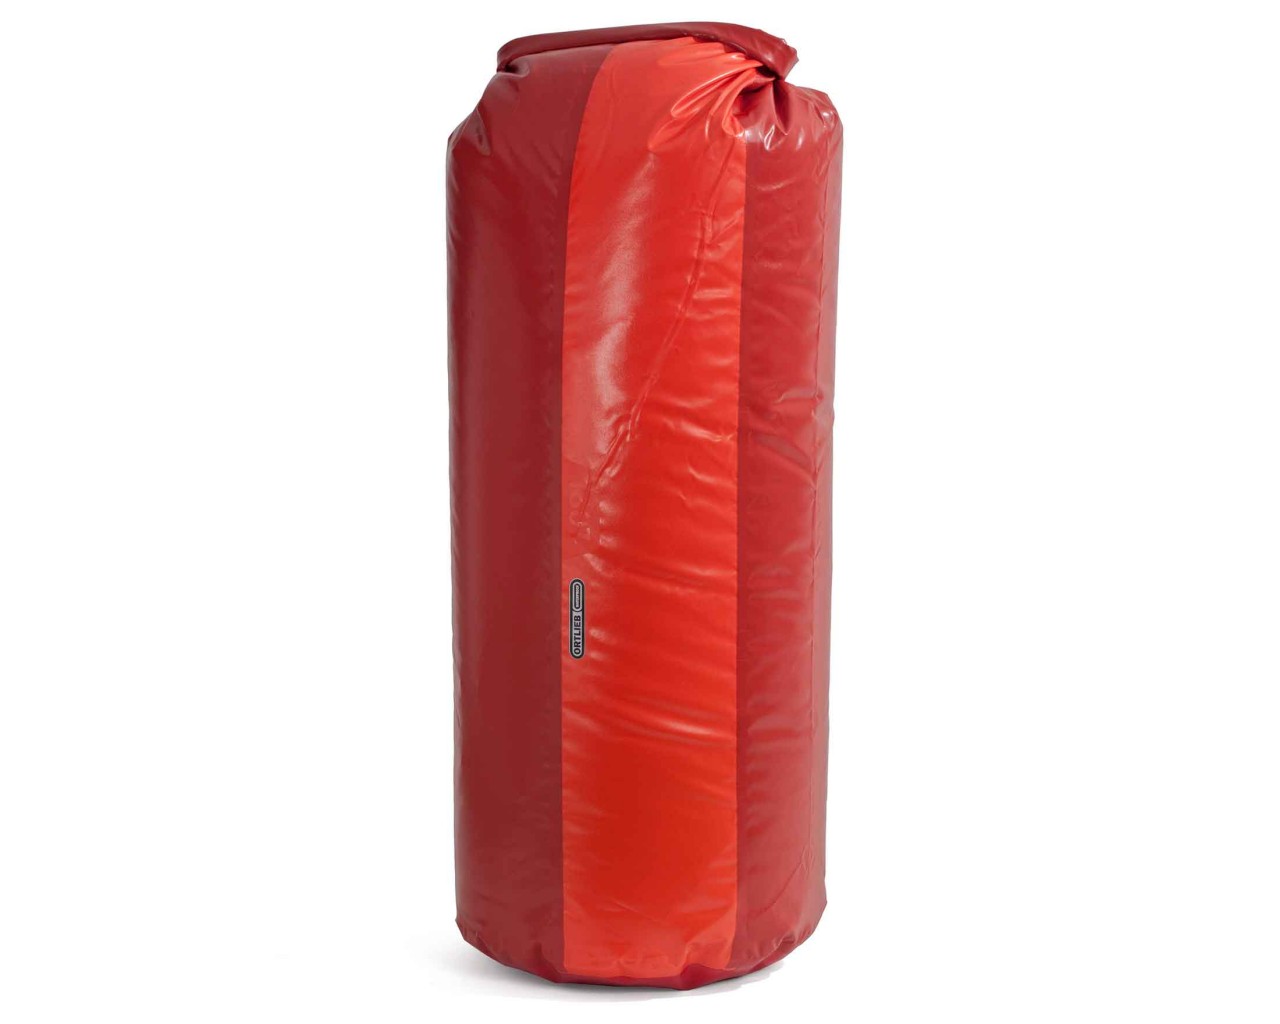 Ortlieb dry bag PD350 - 109 liter | cranberry-signal red